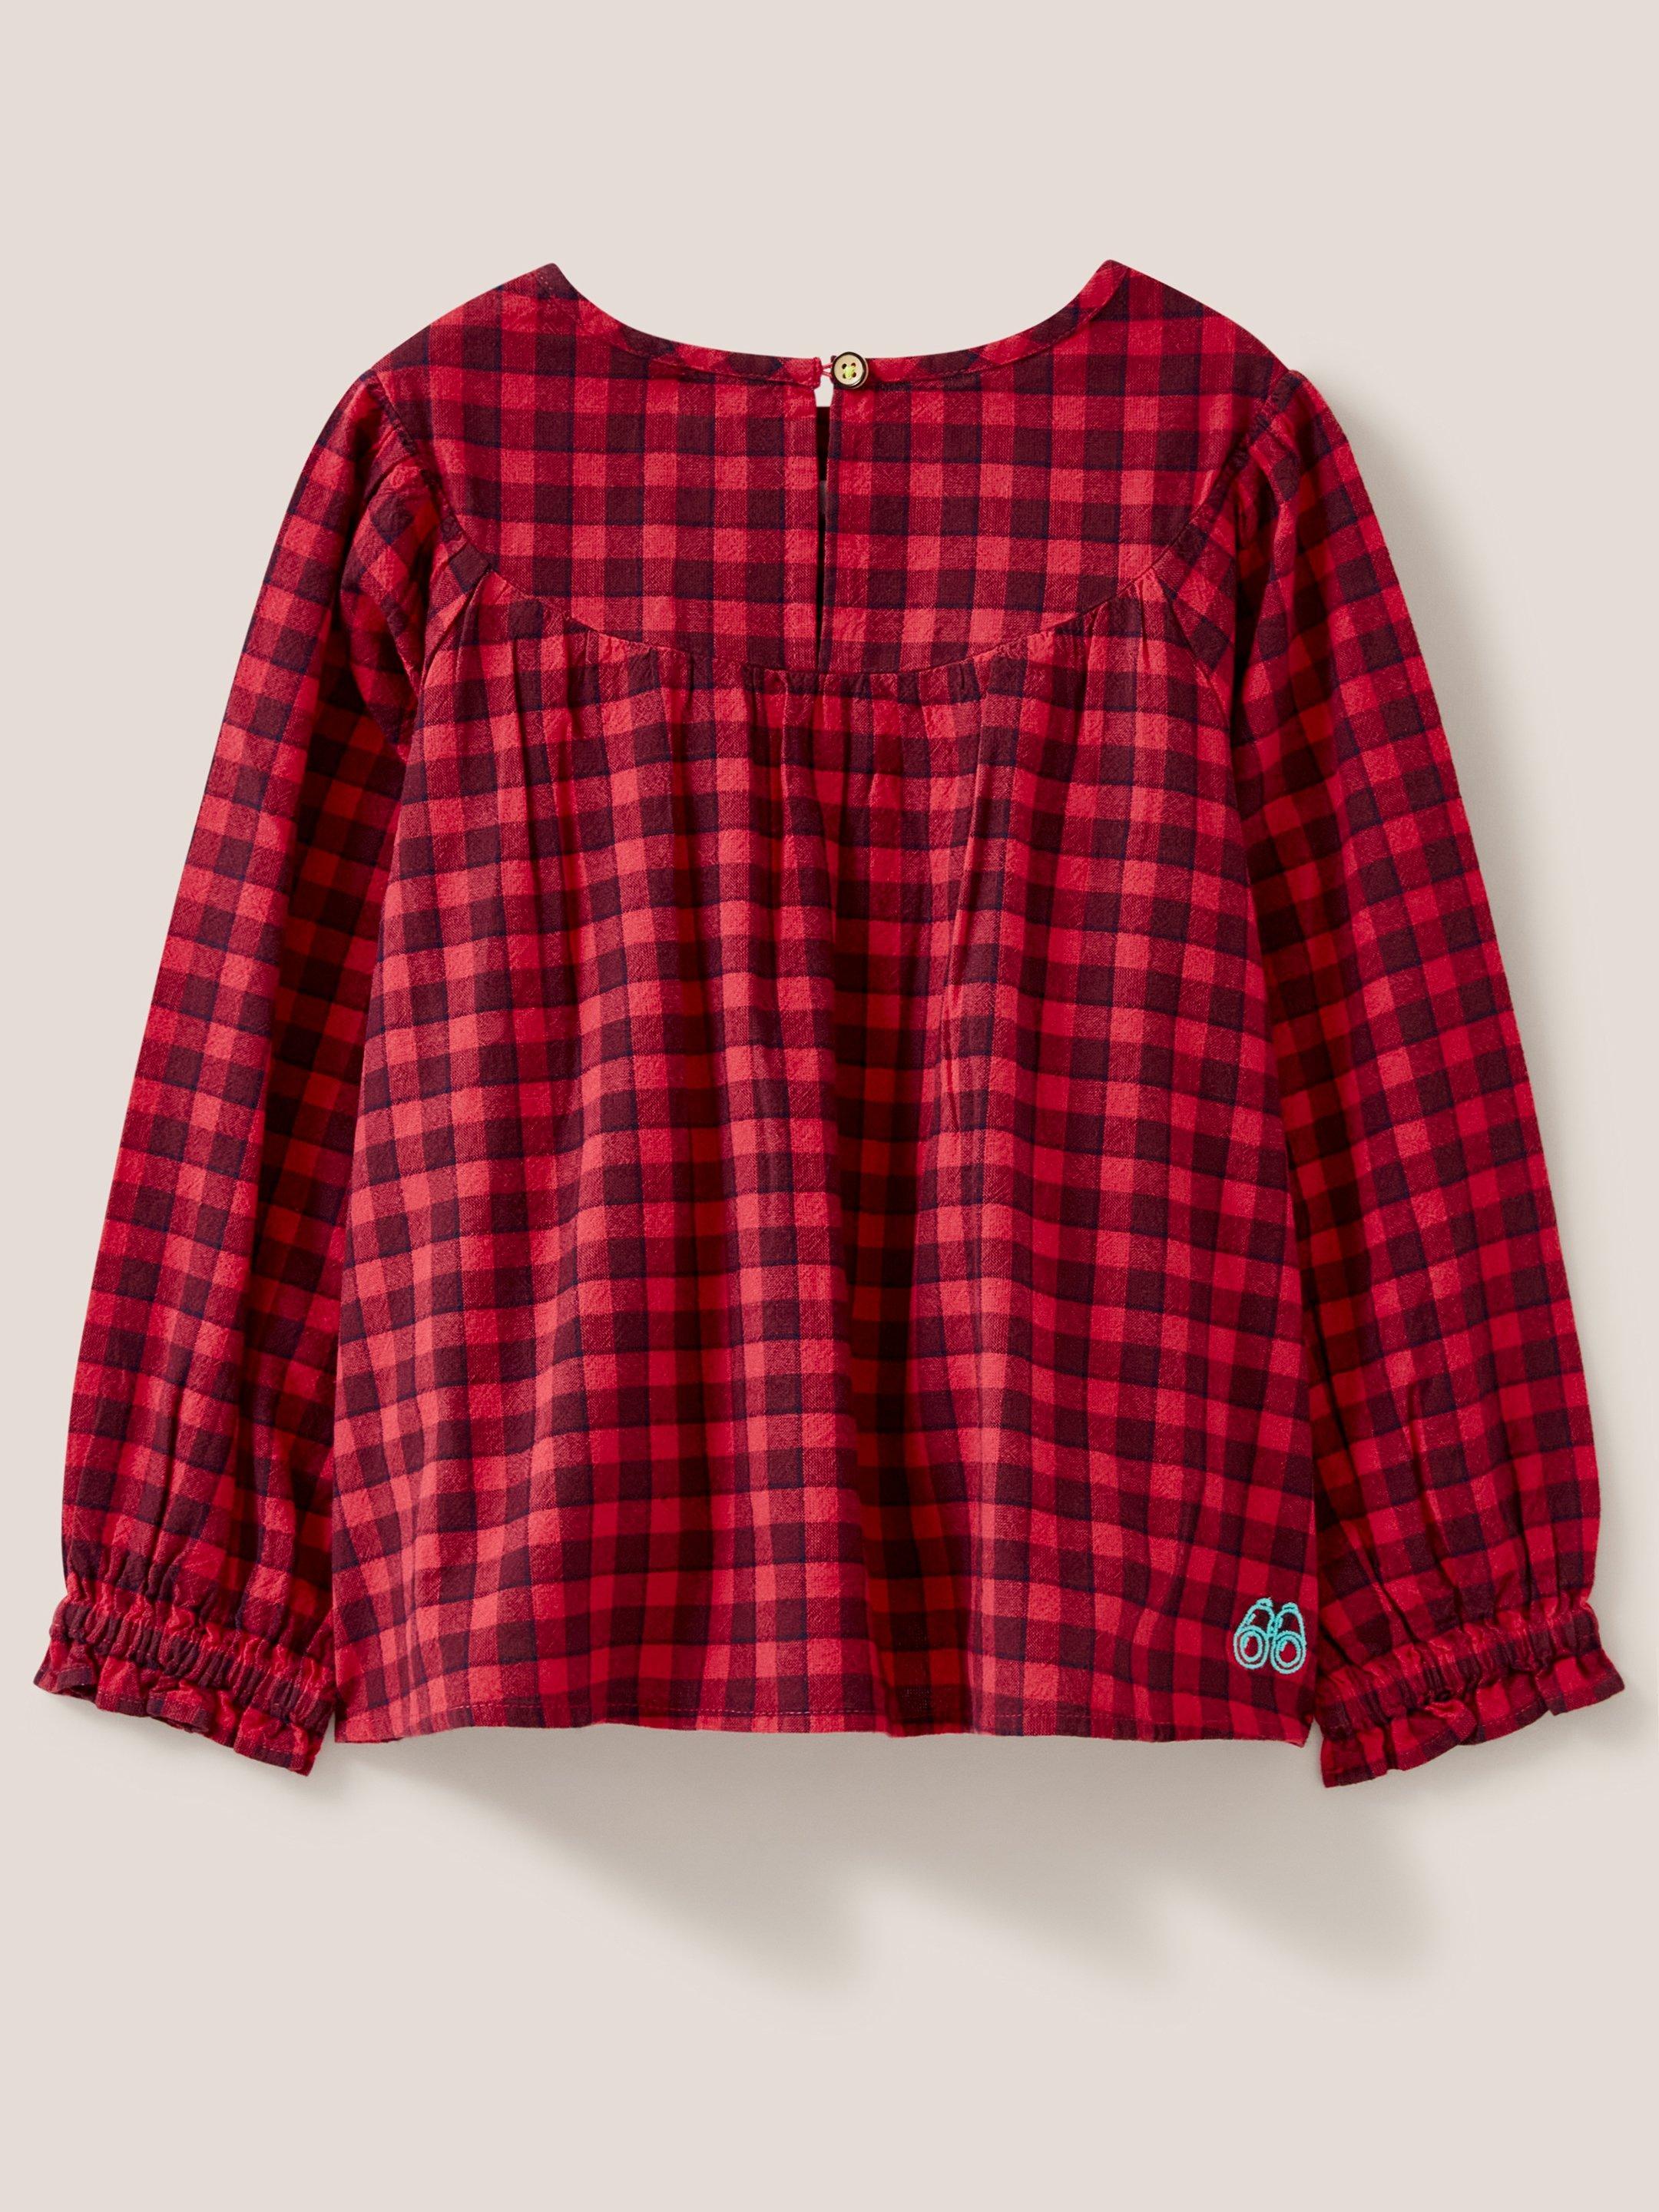 Adeline Check Top in RED MLT - FLAT BACK